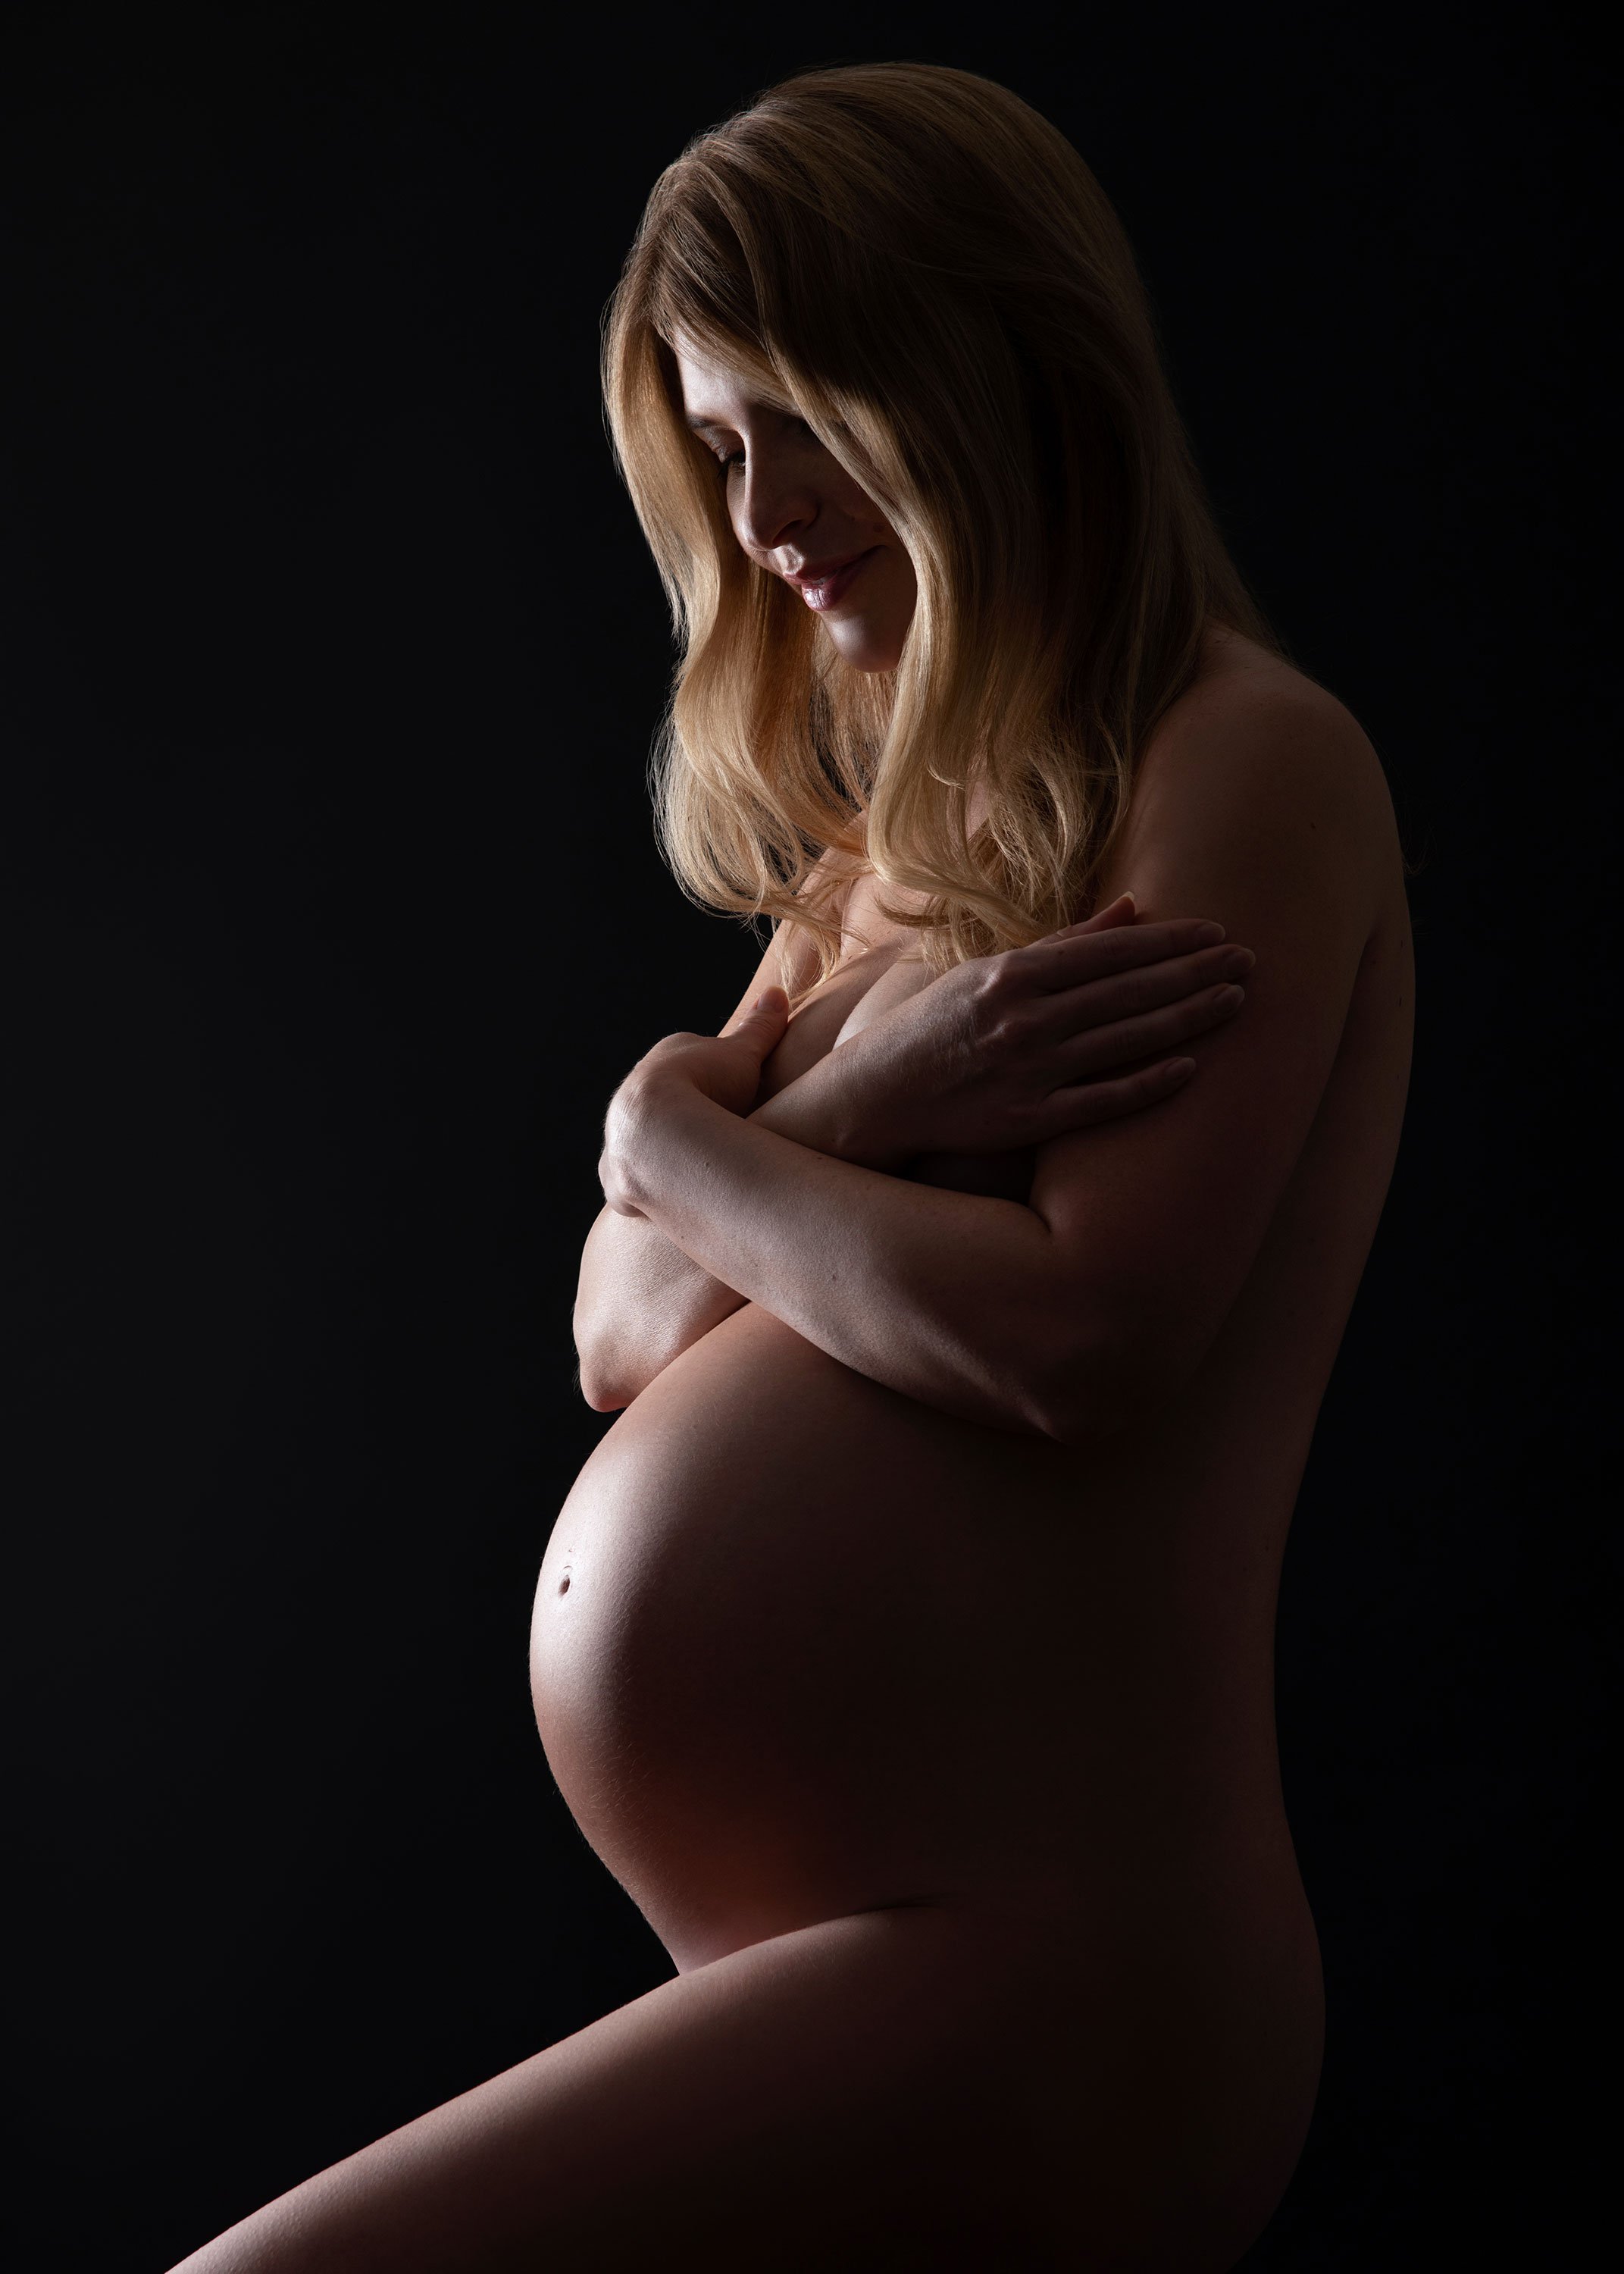 Pregnancy Nudes The Most Requested Maternity Studio Portrait London